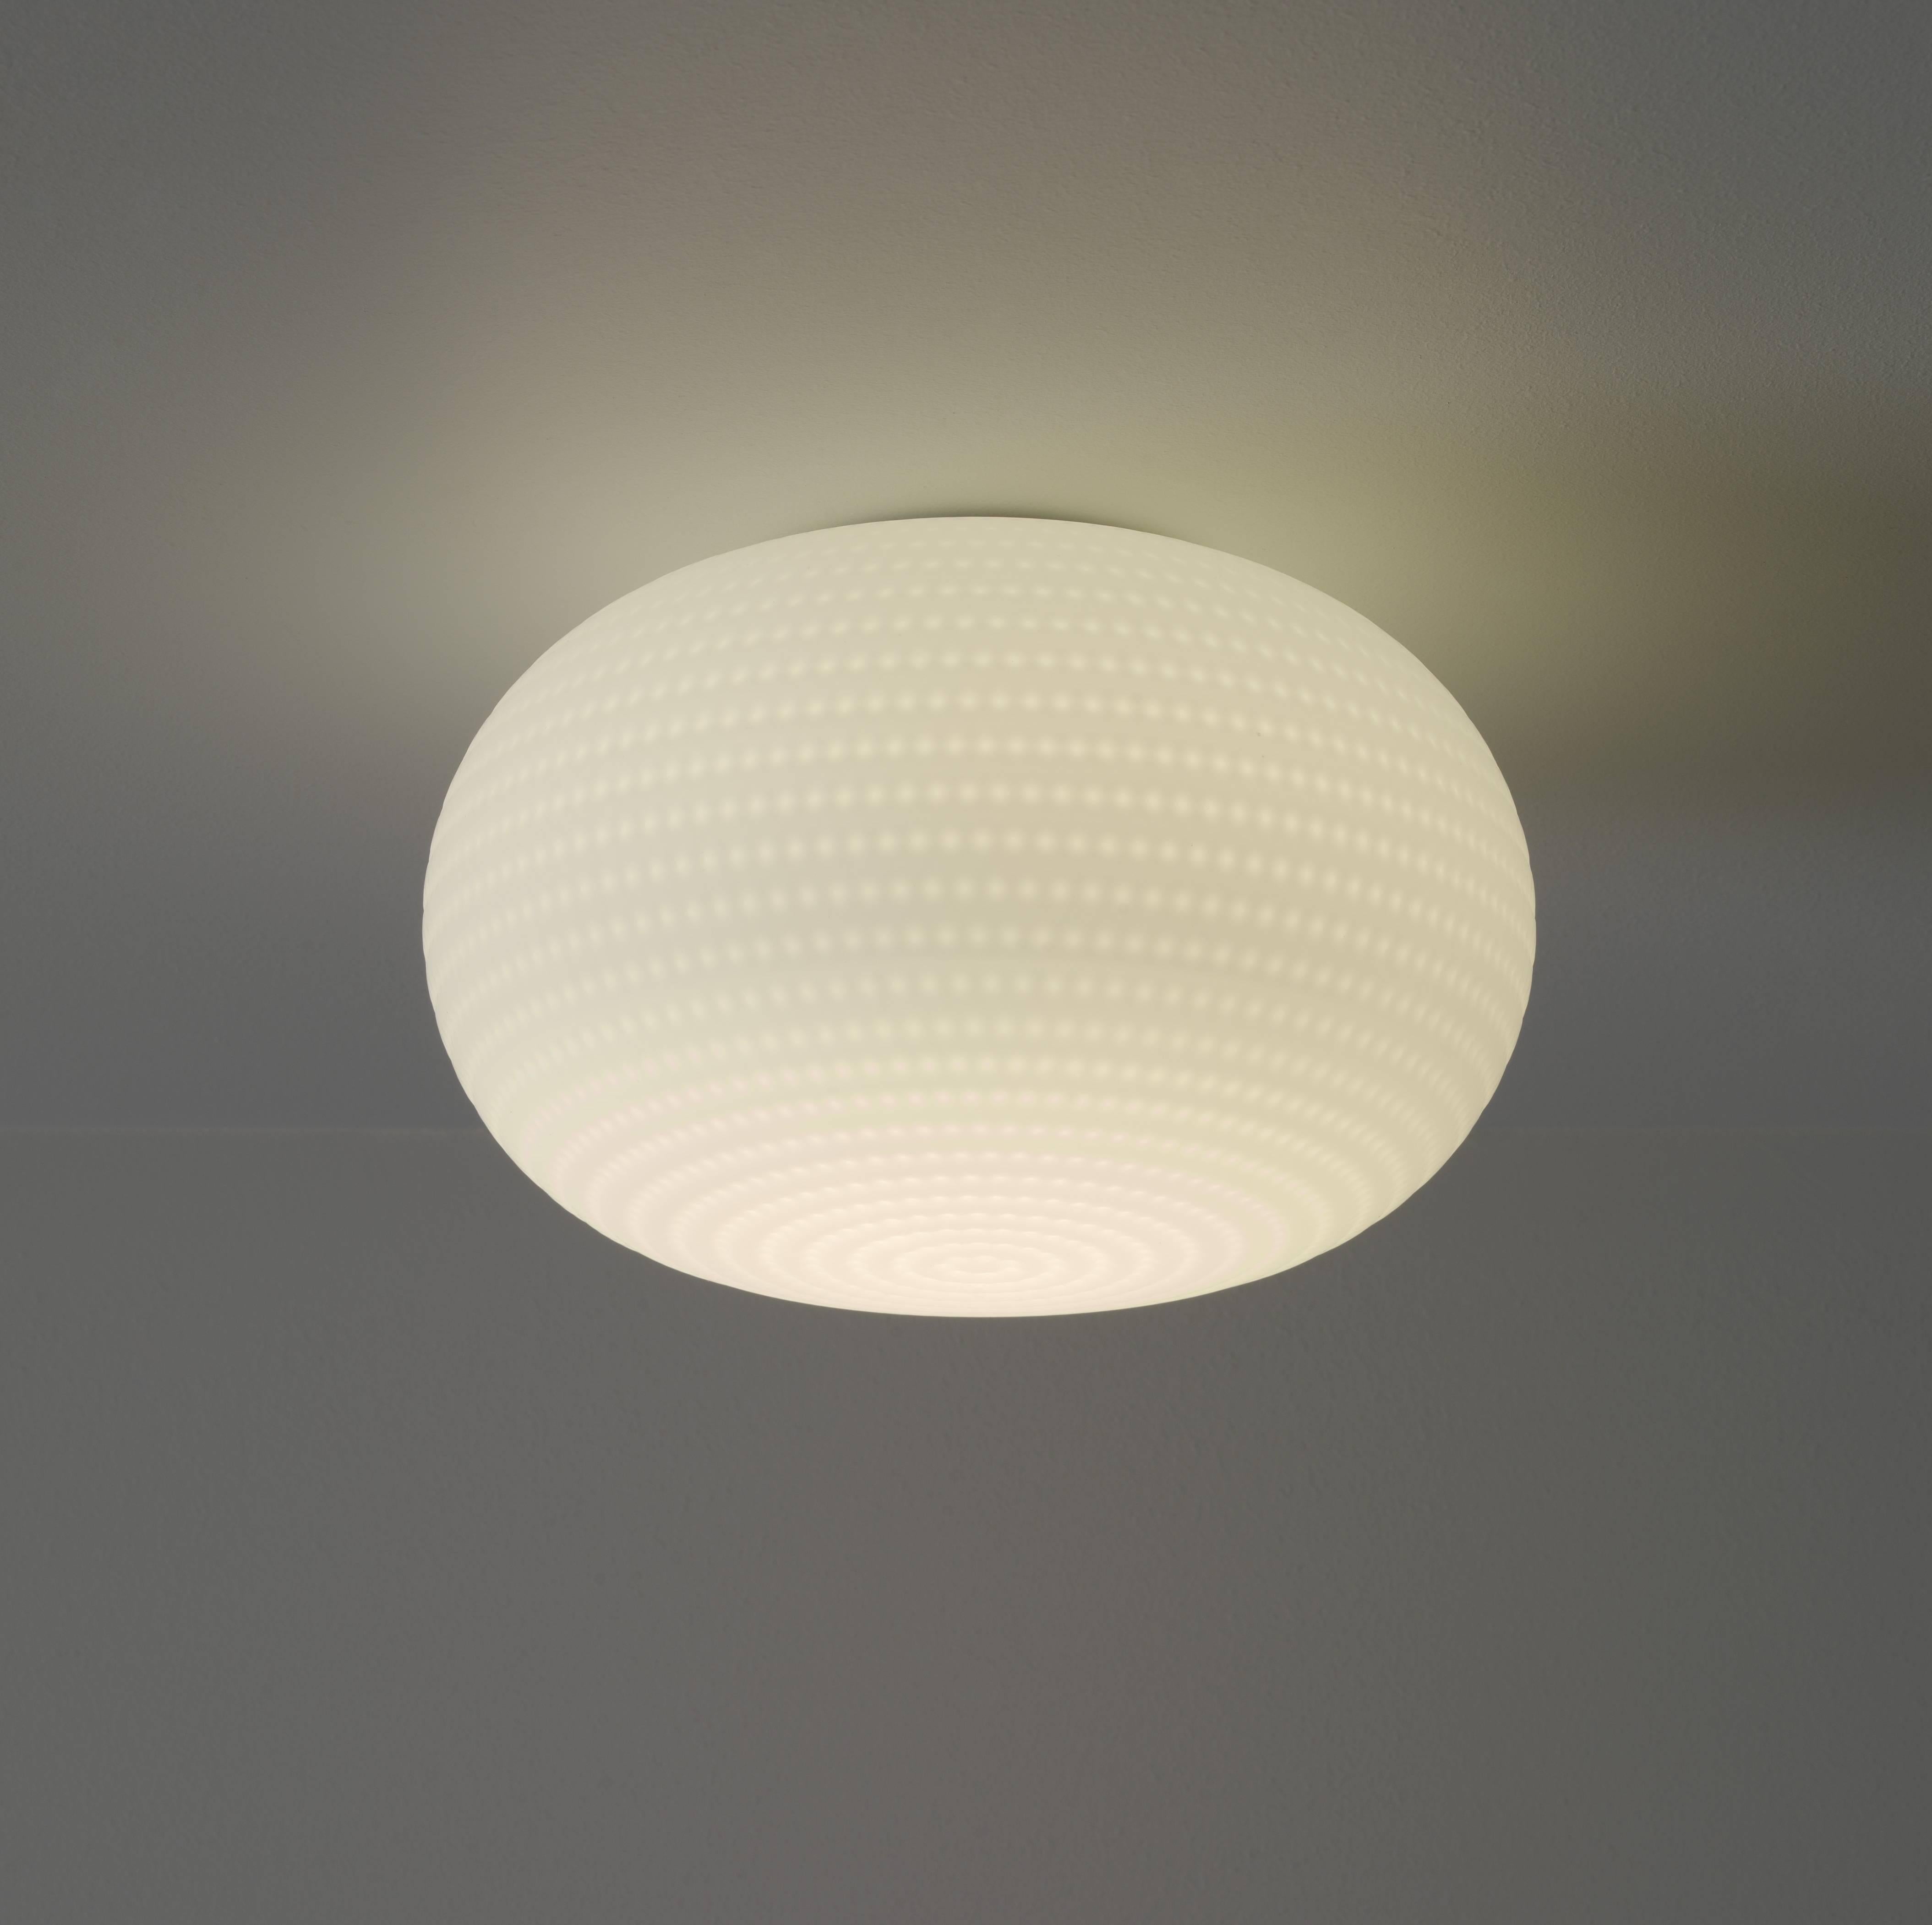 Its beautifully balanced shape is enriched and made unique by an orderly series of delicate, light grooves that, on the white volume of the glass, look like tiny prints on fresh snow.

Dimensions: (ø 50 × 35 cm).
Bulbs: 1×150W E26.
 